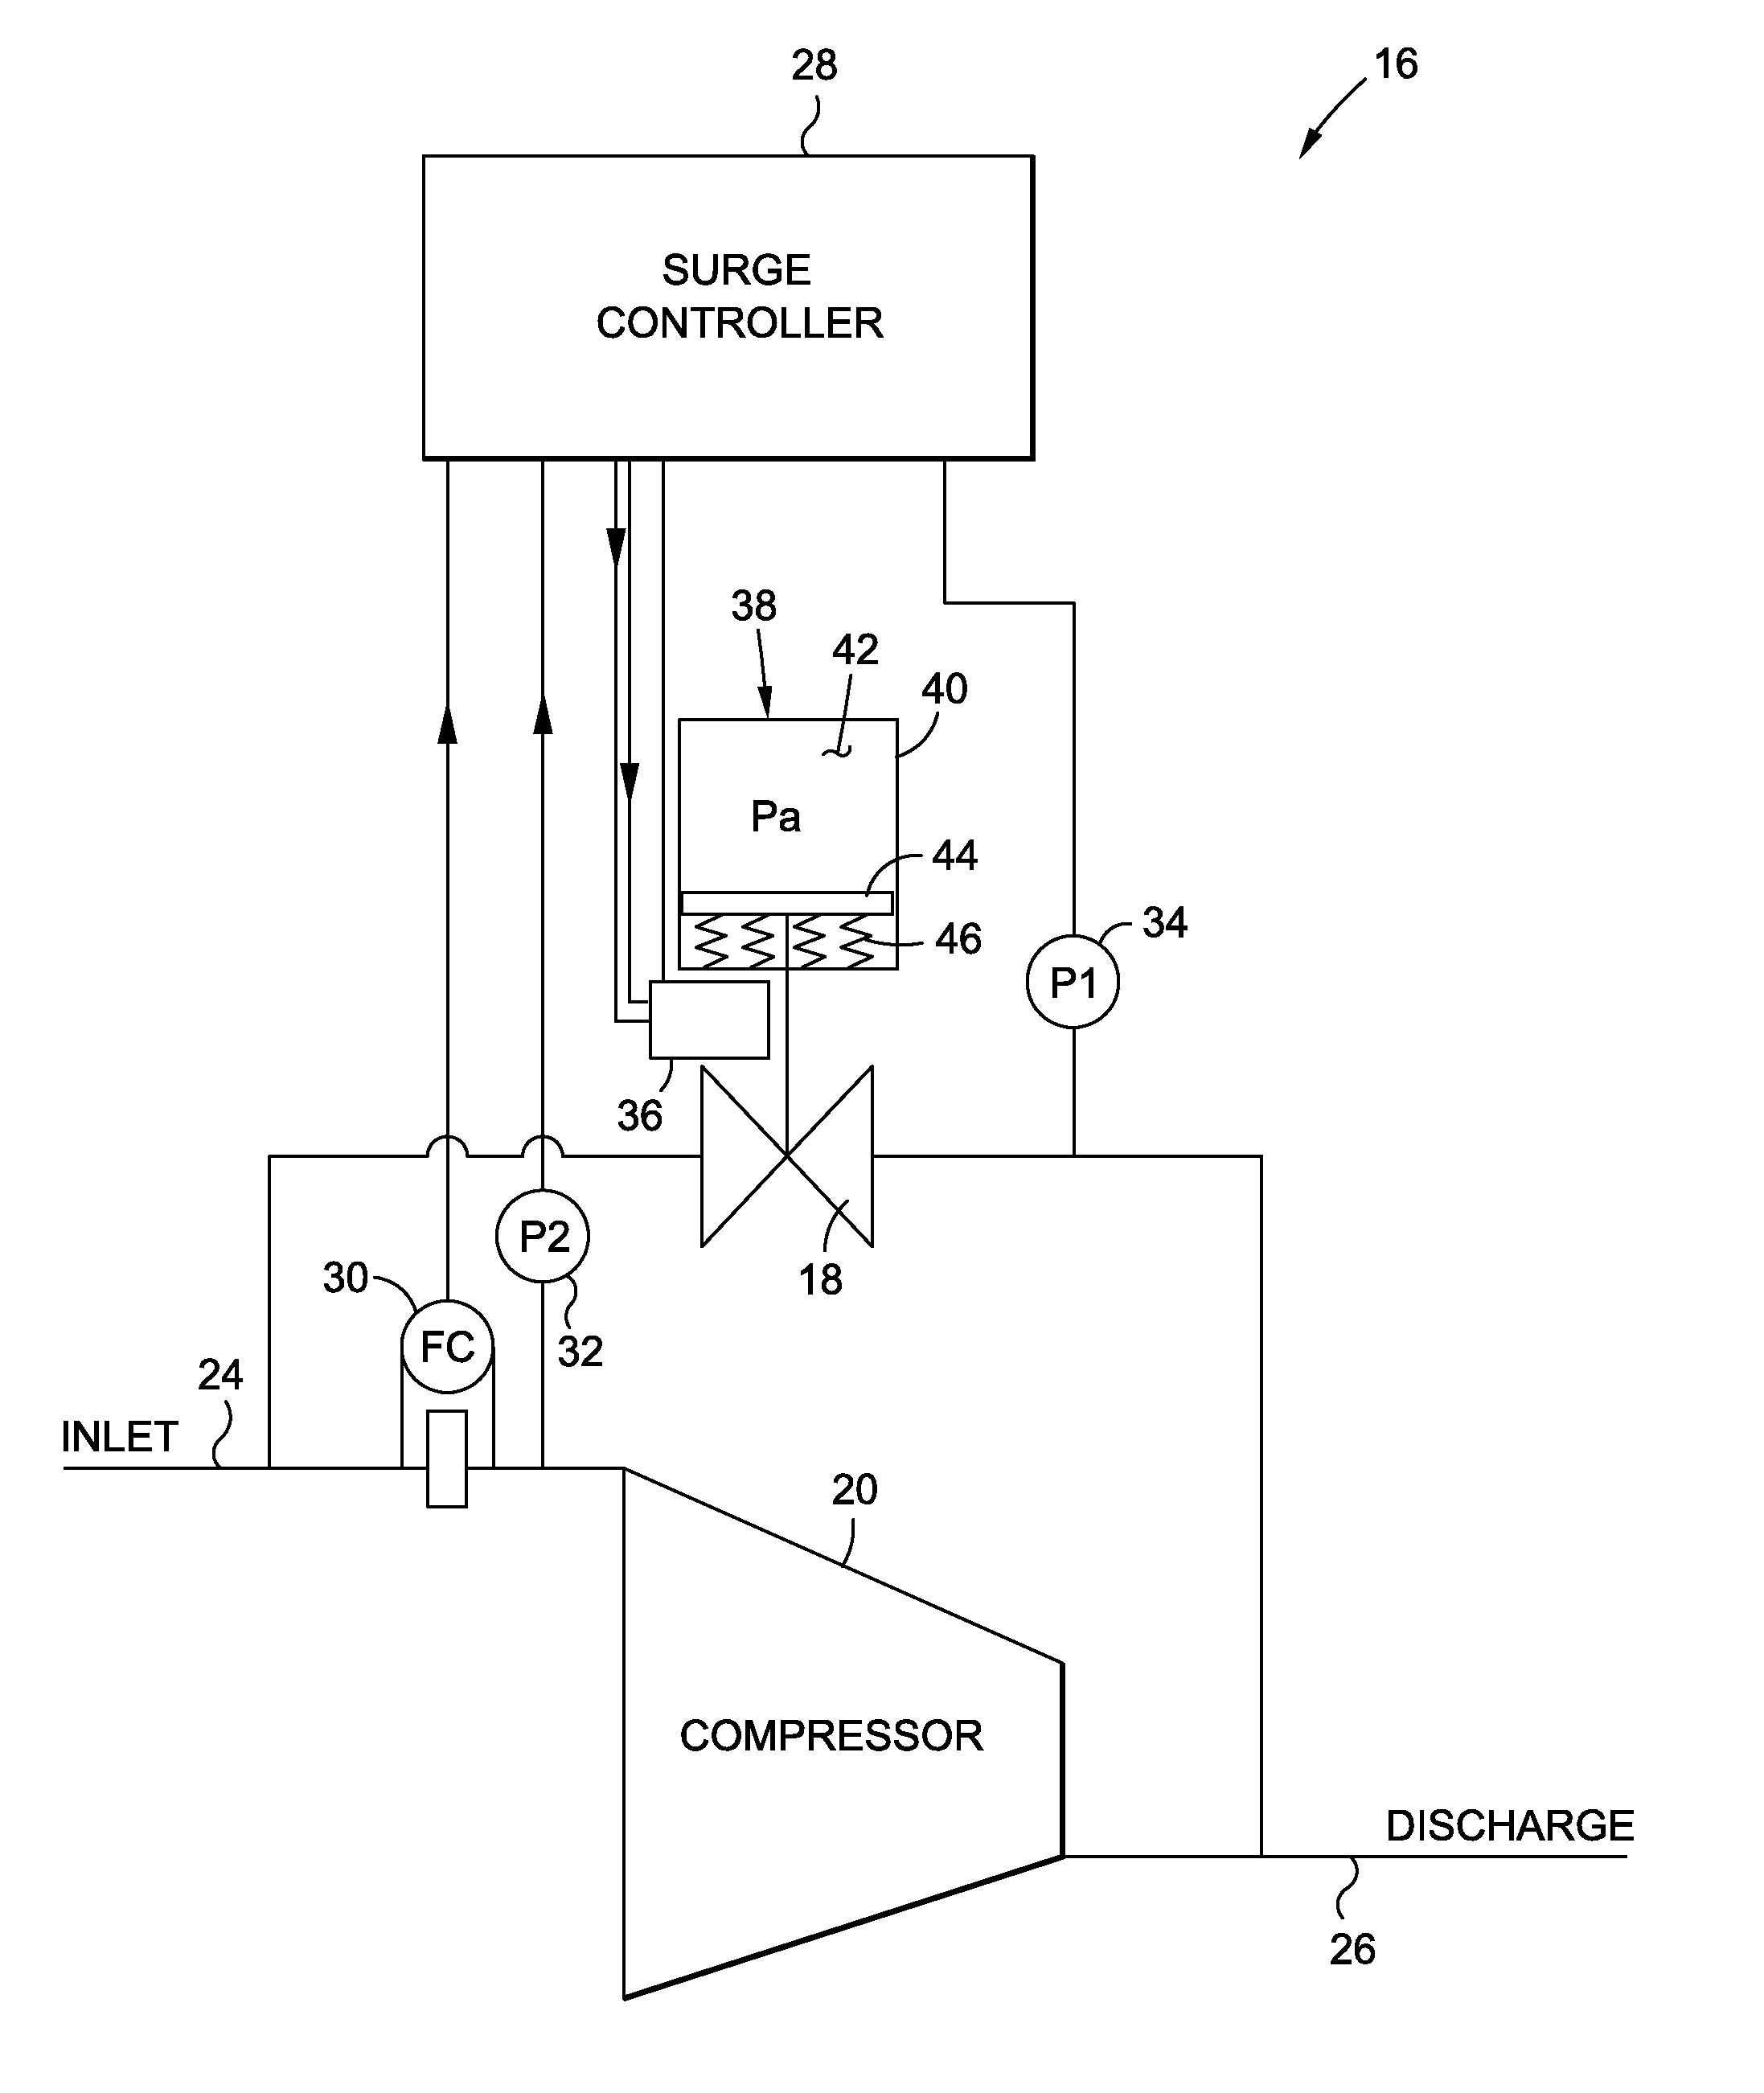 Dead time reducer for piston actuator